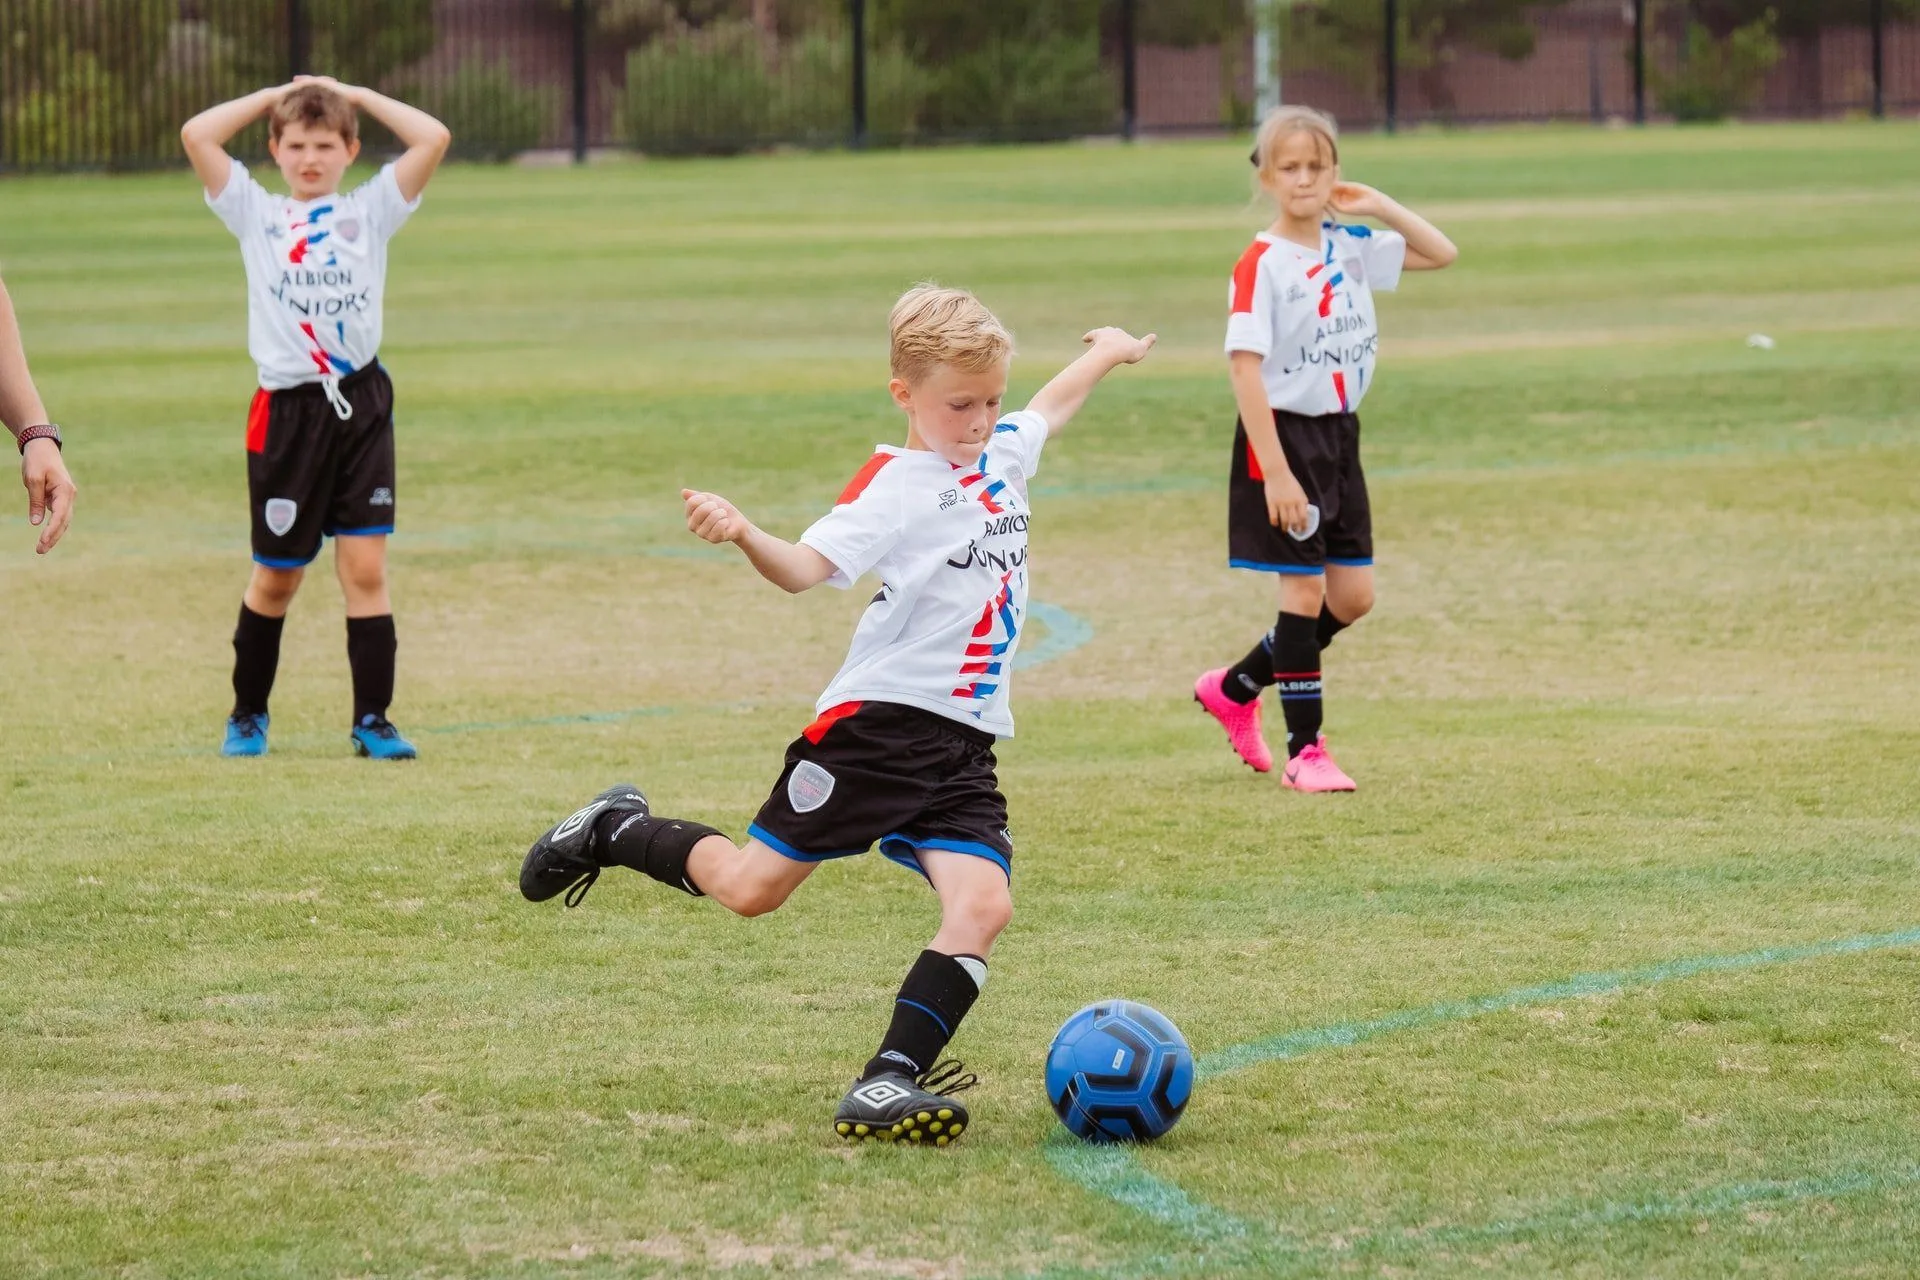 Dr Matthew Sacco Shares 5 Great Benefits For Children Playing Team Sports